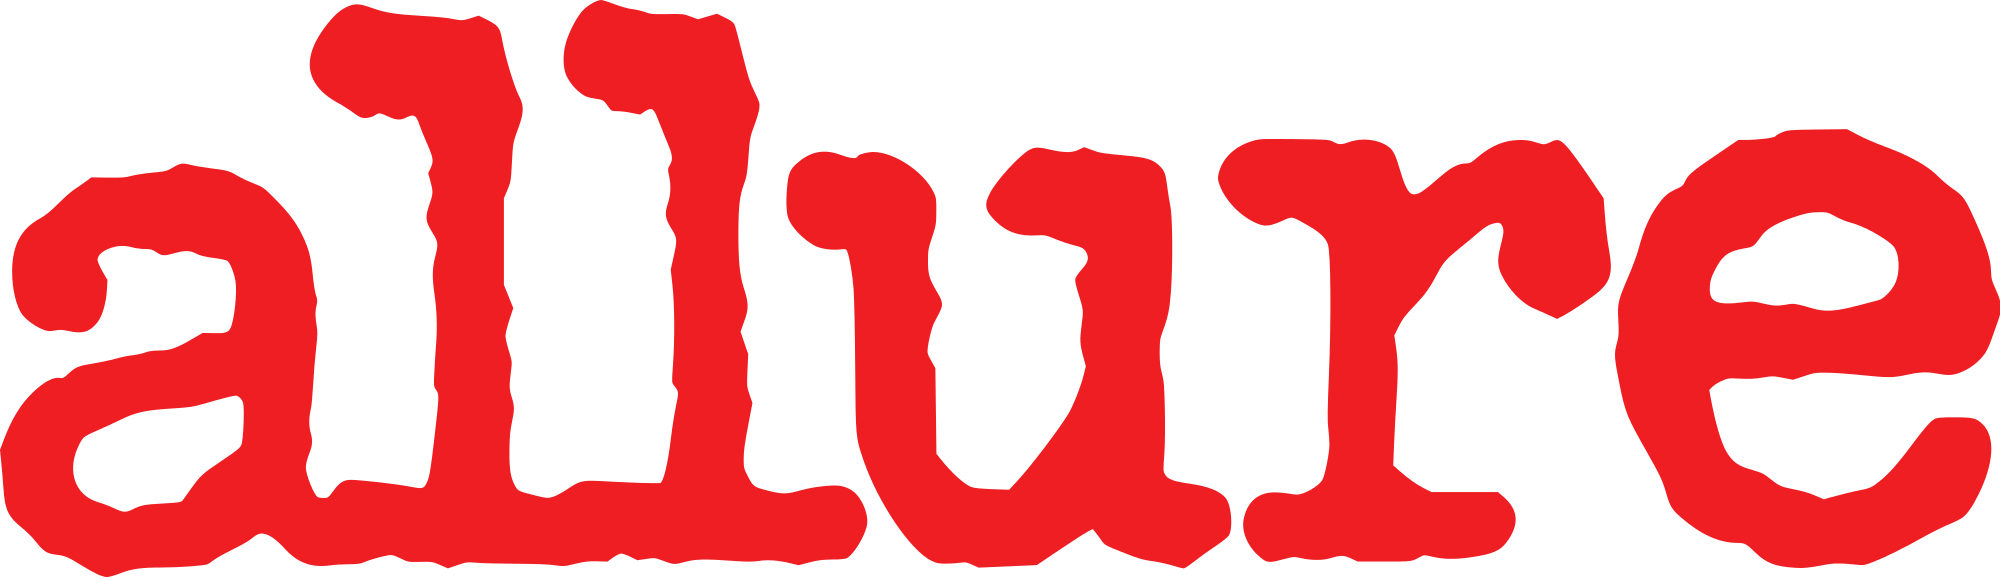 371-3716375_the-latest-allure-magazine-logo-png-transparent-png.png